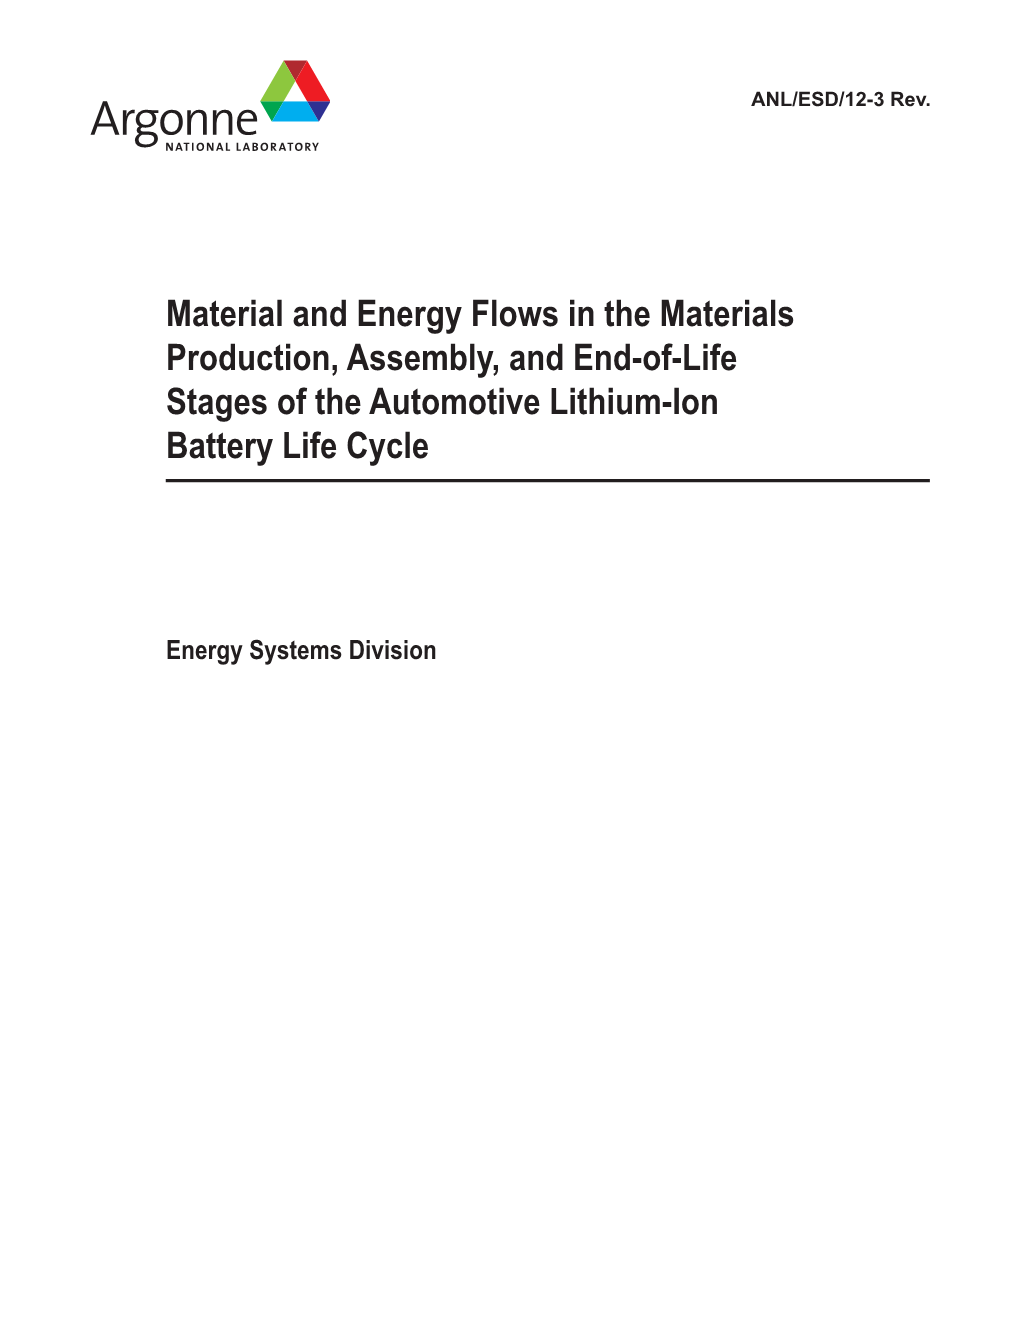 Material and Energy Flows in the Materials Production, Assembly, and End-Of-Life Stages of the Automotive Lithium-Ion Battery Life Cycle